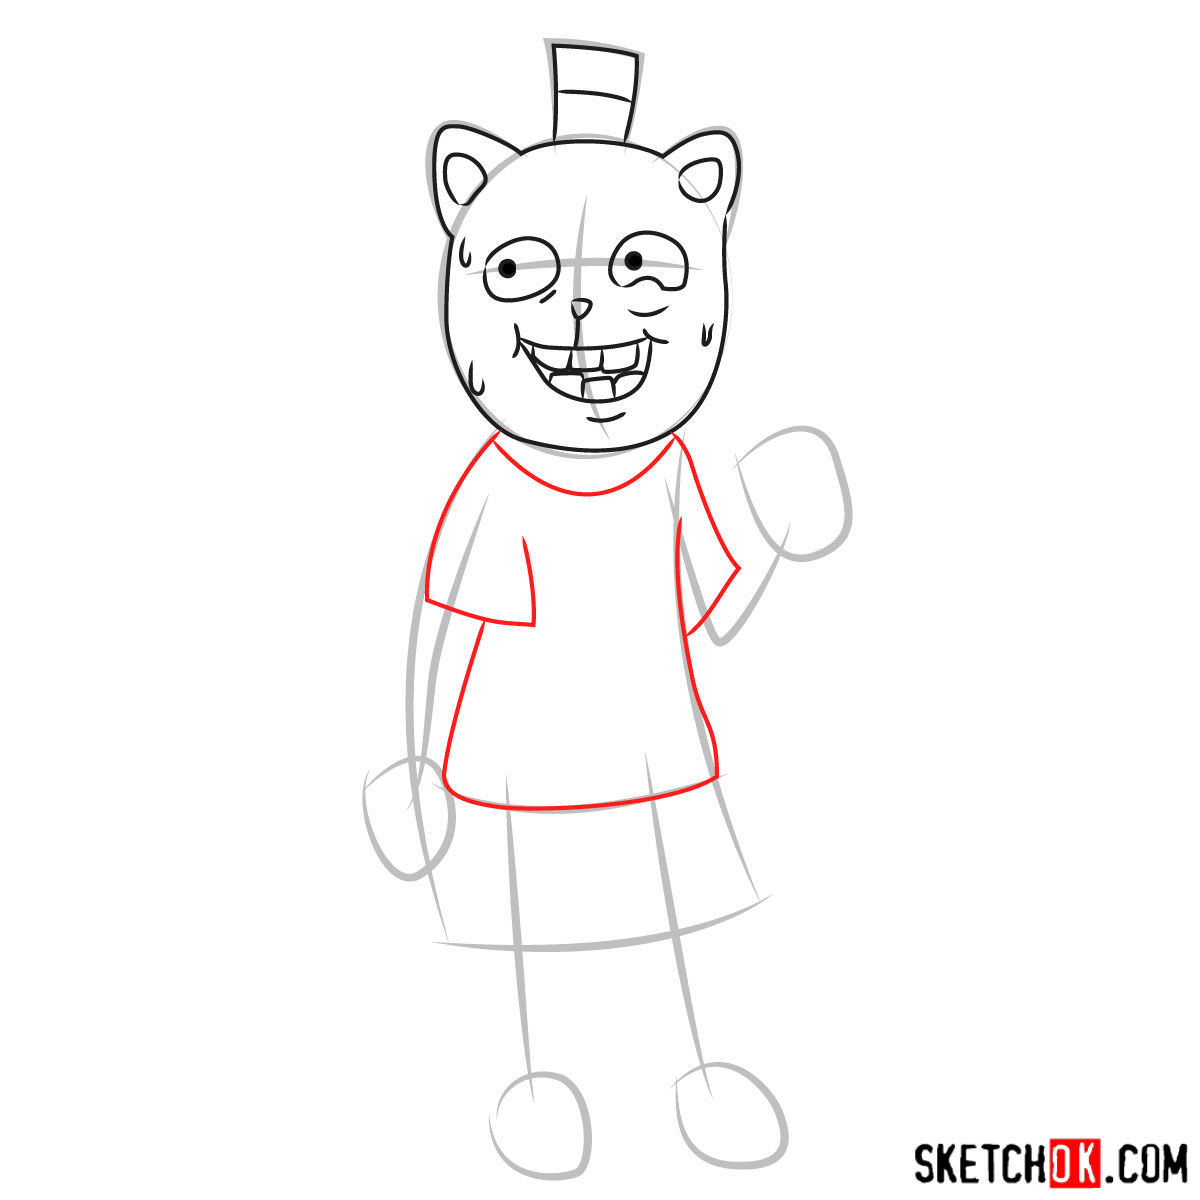 How to draw Burgerpants from Undertale - step 05